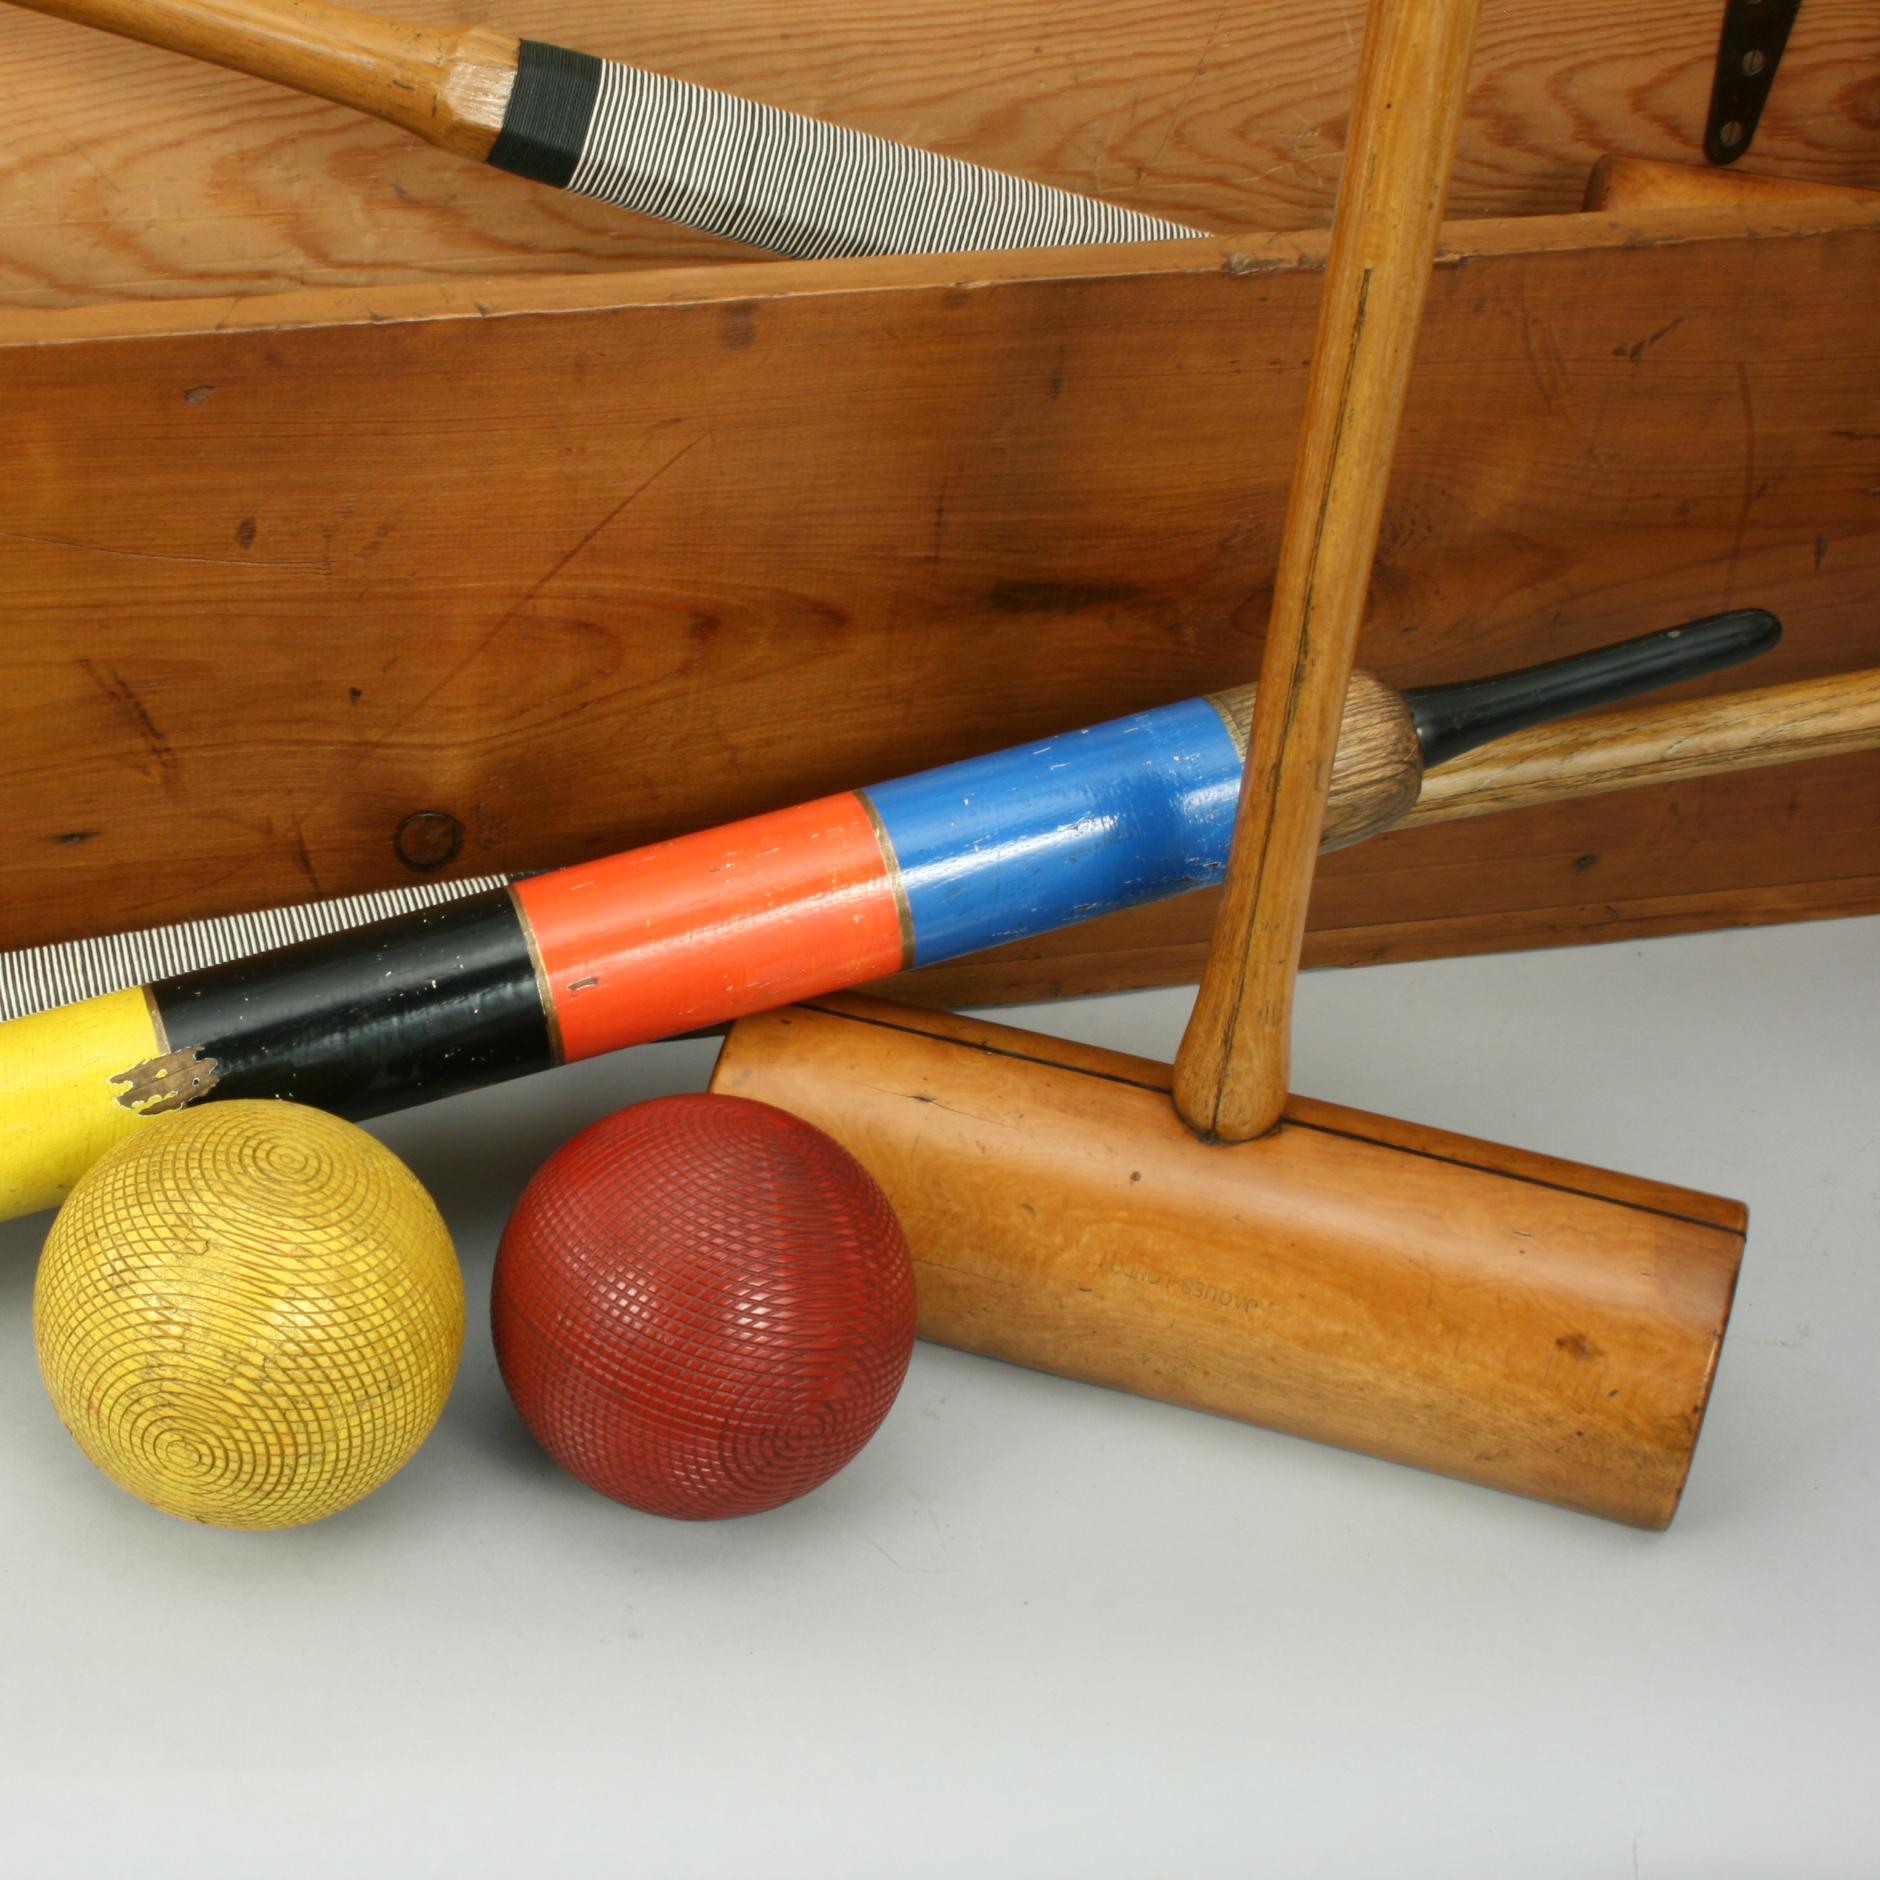 Boxwood Vintage Croquet Set in Pine Box, Jaques, London, Army and Navy Co-Op Society Ltd